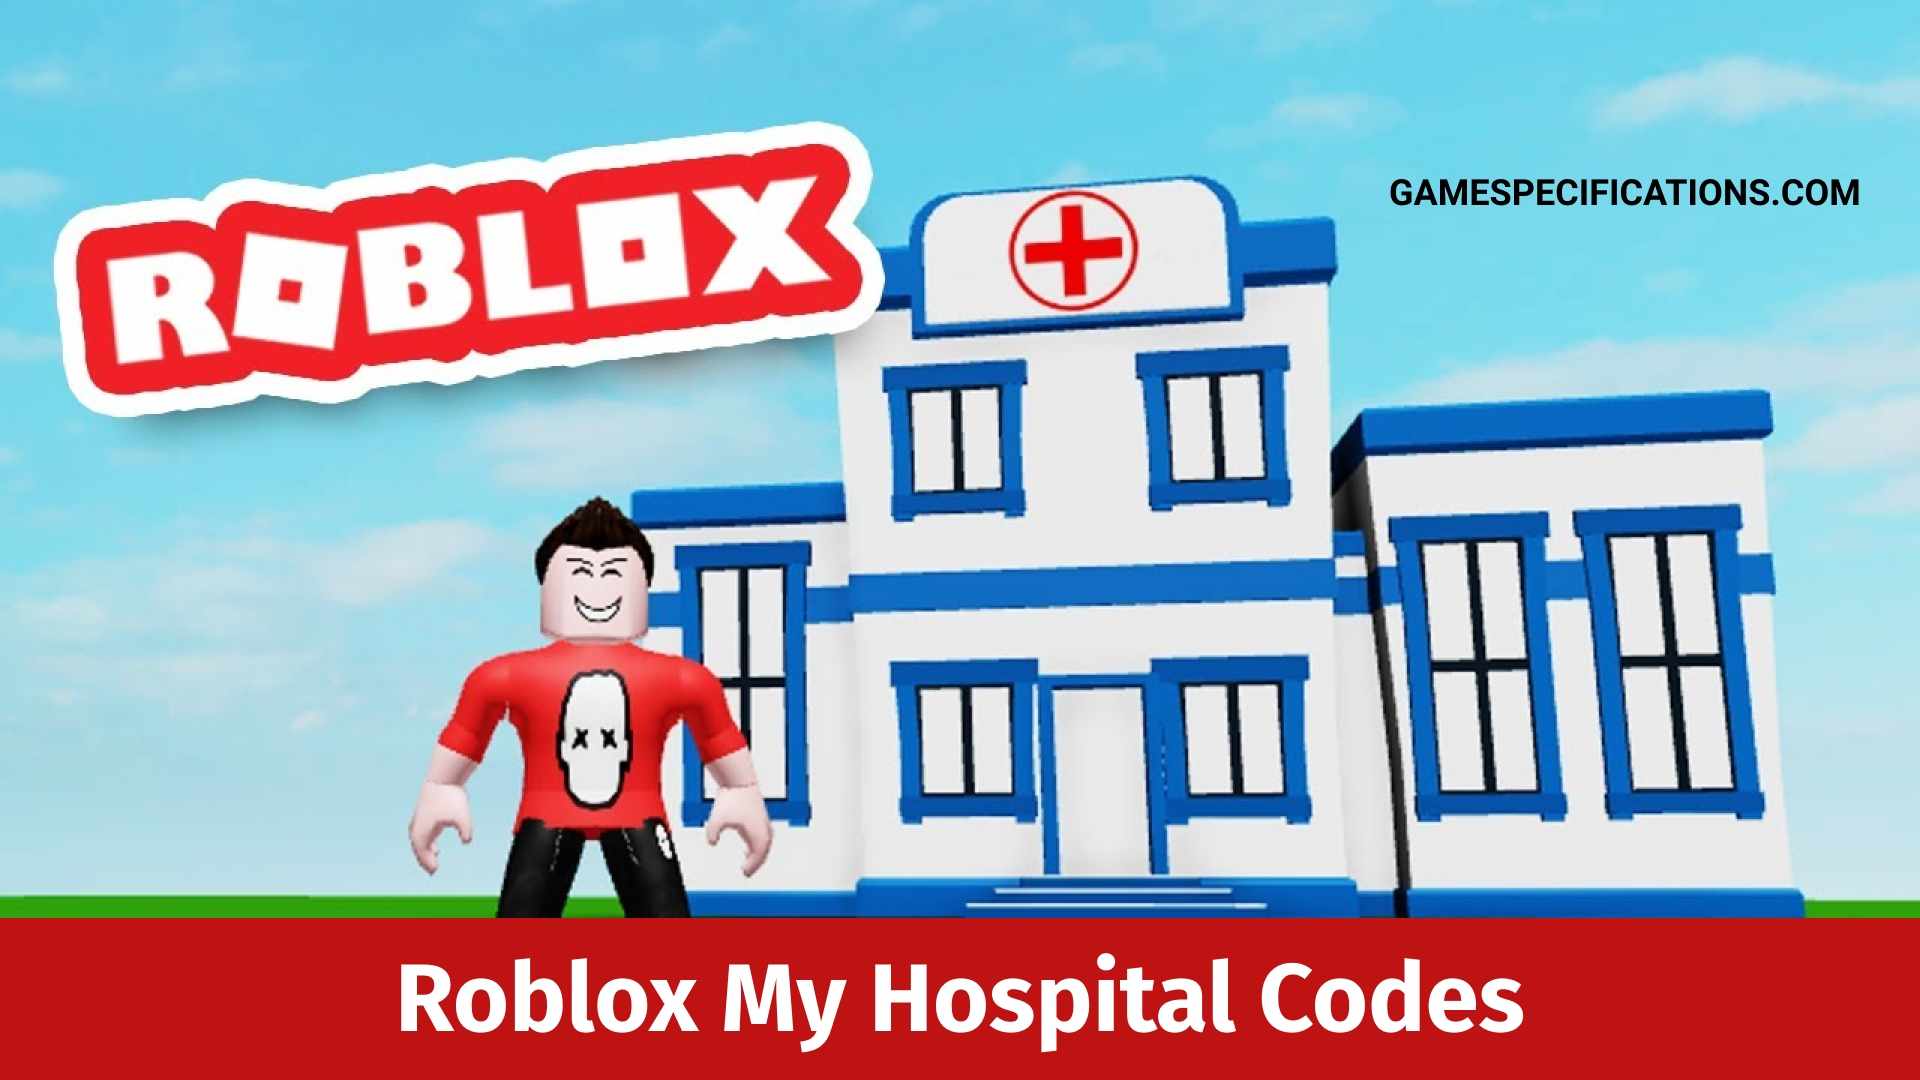 Roblox My Hospital Codes July 2021 Game Specifications - roblox logo through the years 2004 2021